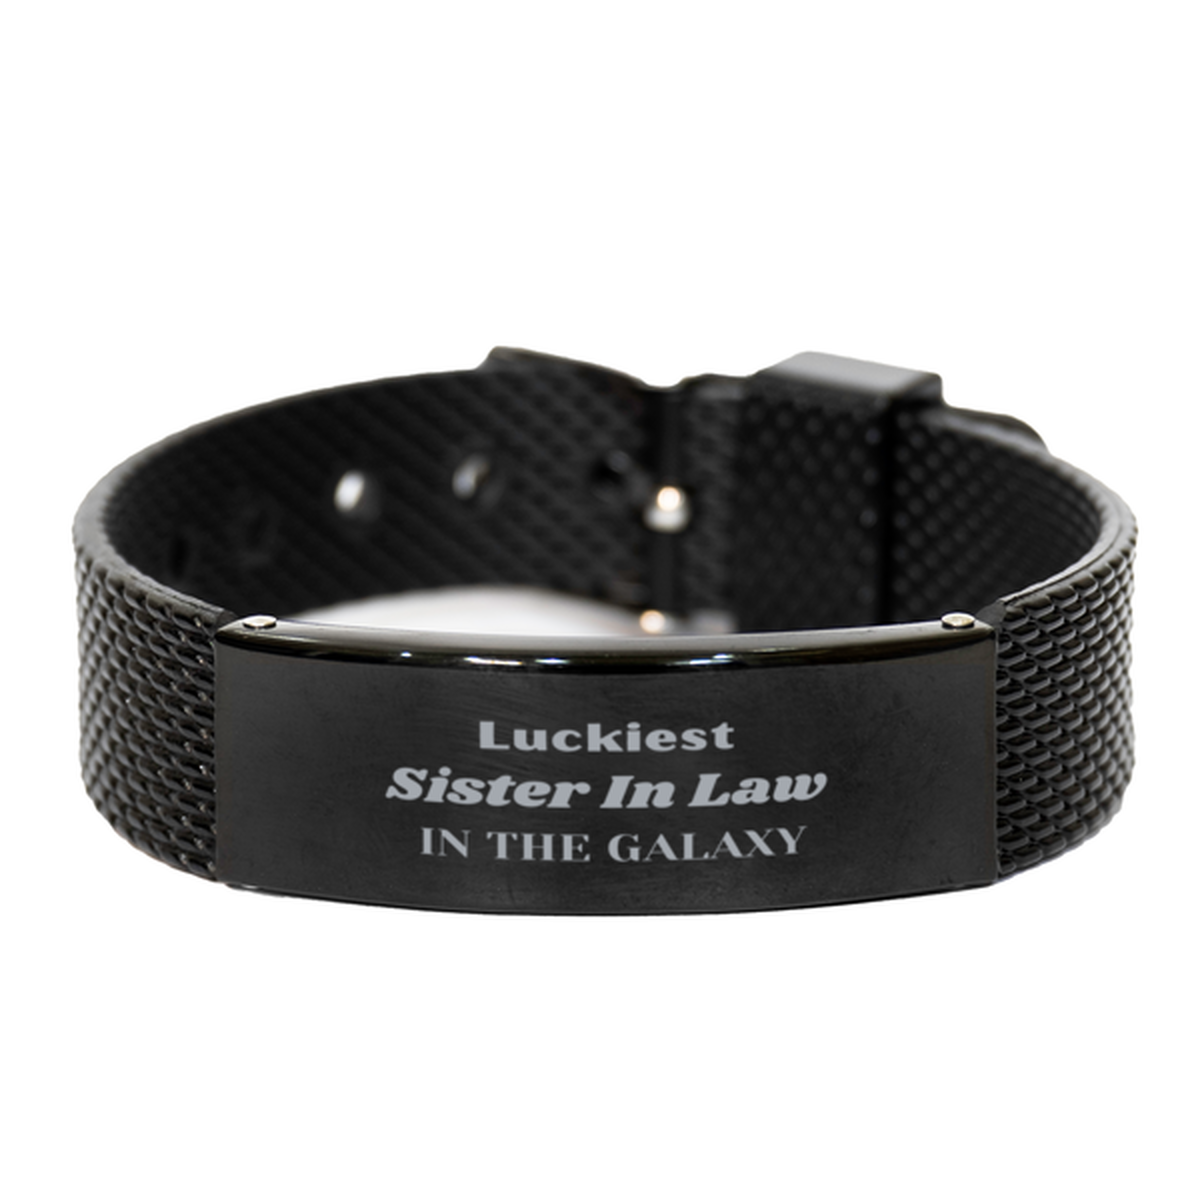 Luckiest Sister In Law in the Galaxy, To My Sister In Law Engraved Gifts, Christmas Sister In Law Black Shark Mesh Bracelet Gifts, X-mas Birthday Unique Gifts For Sister In Law Men Women